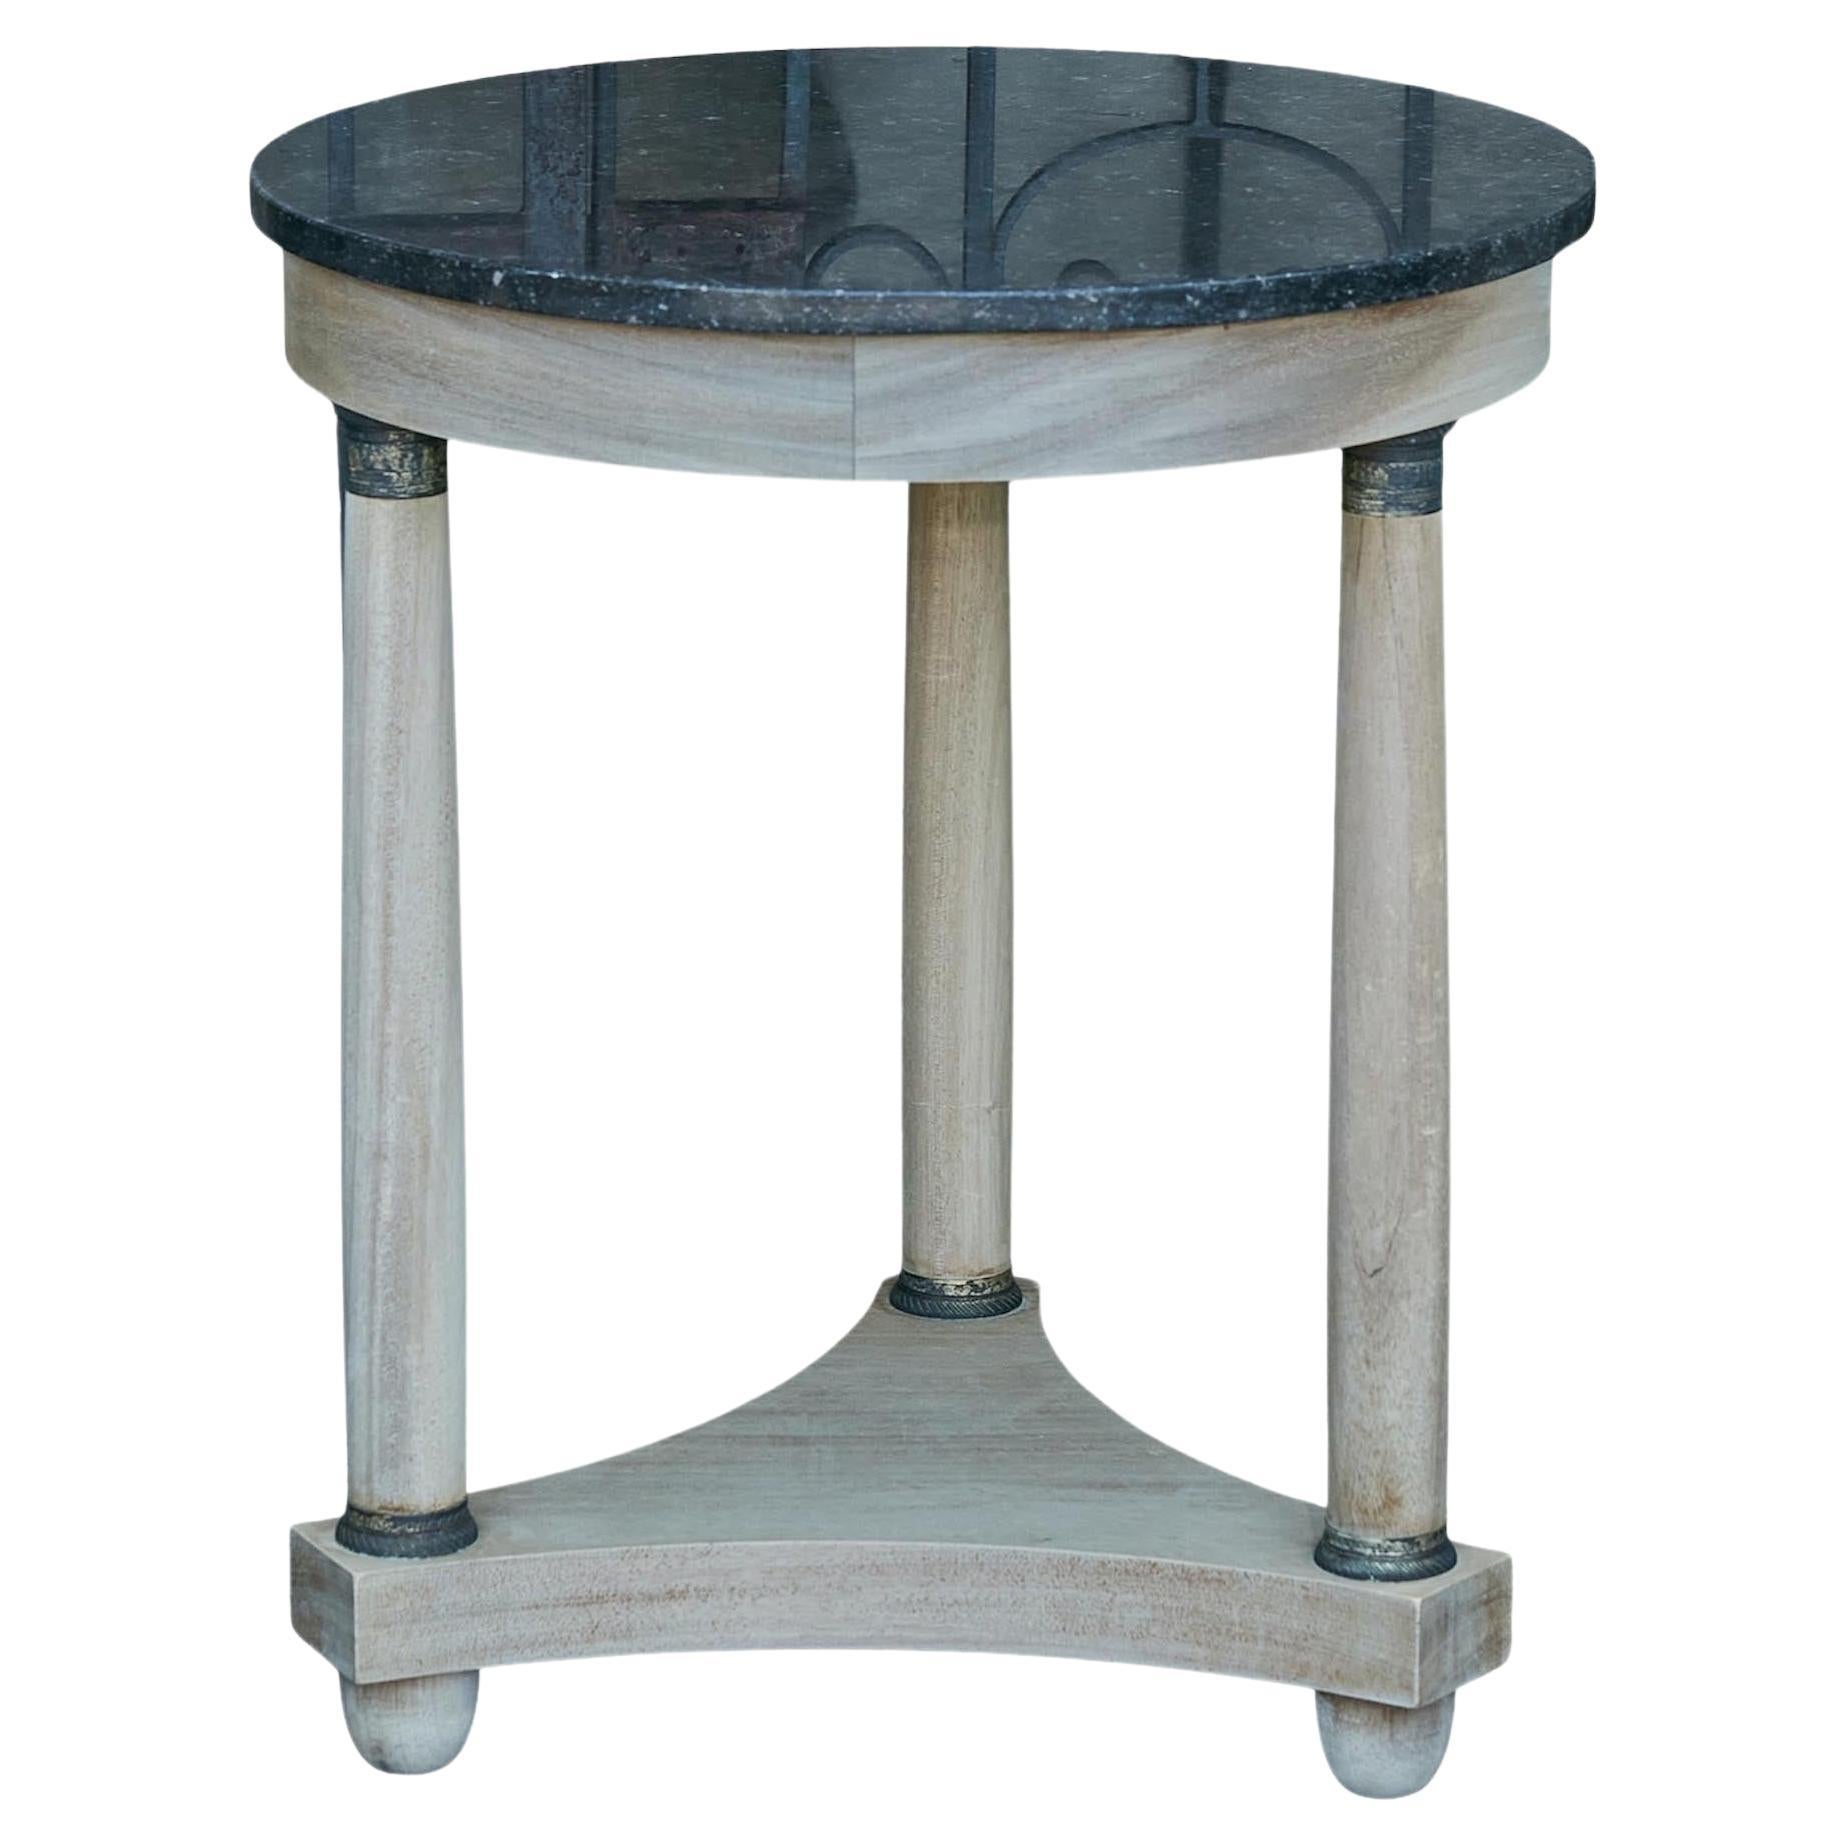 French Empire Style 19th Century Bleached Table with Marble Top and Column Legs For Sale